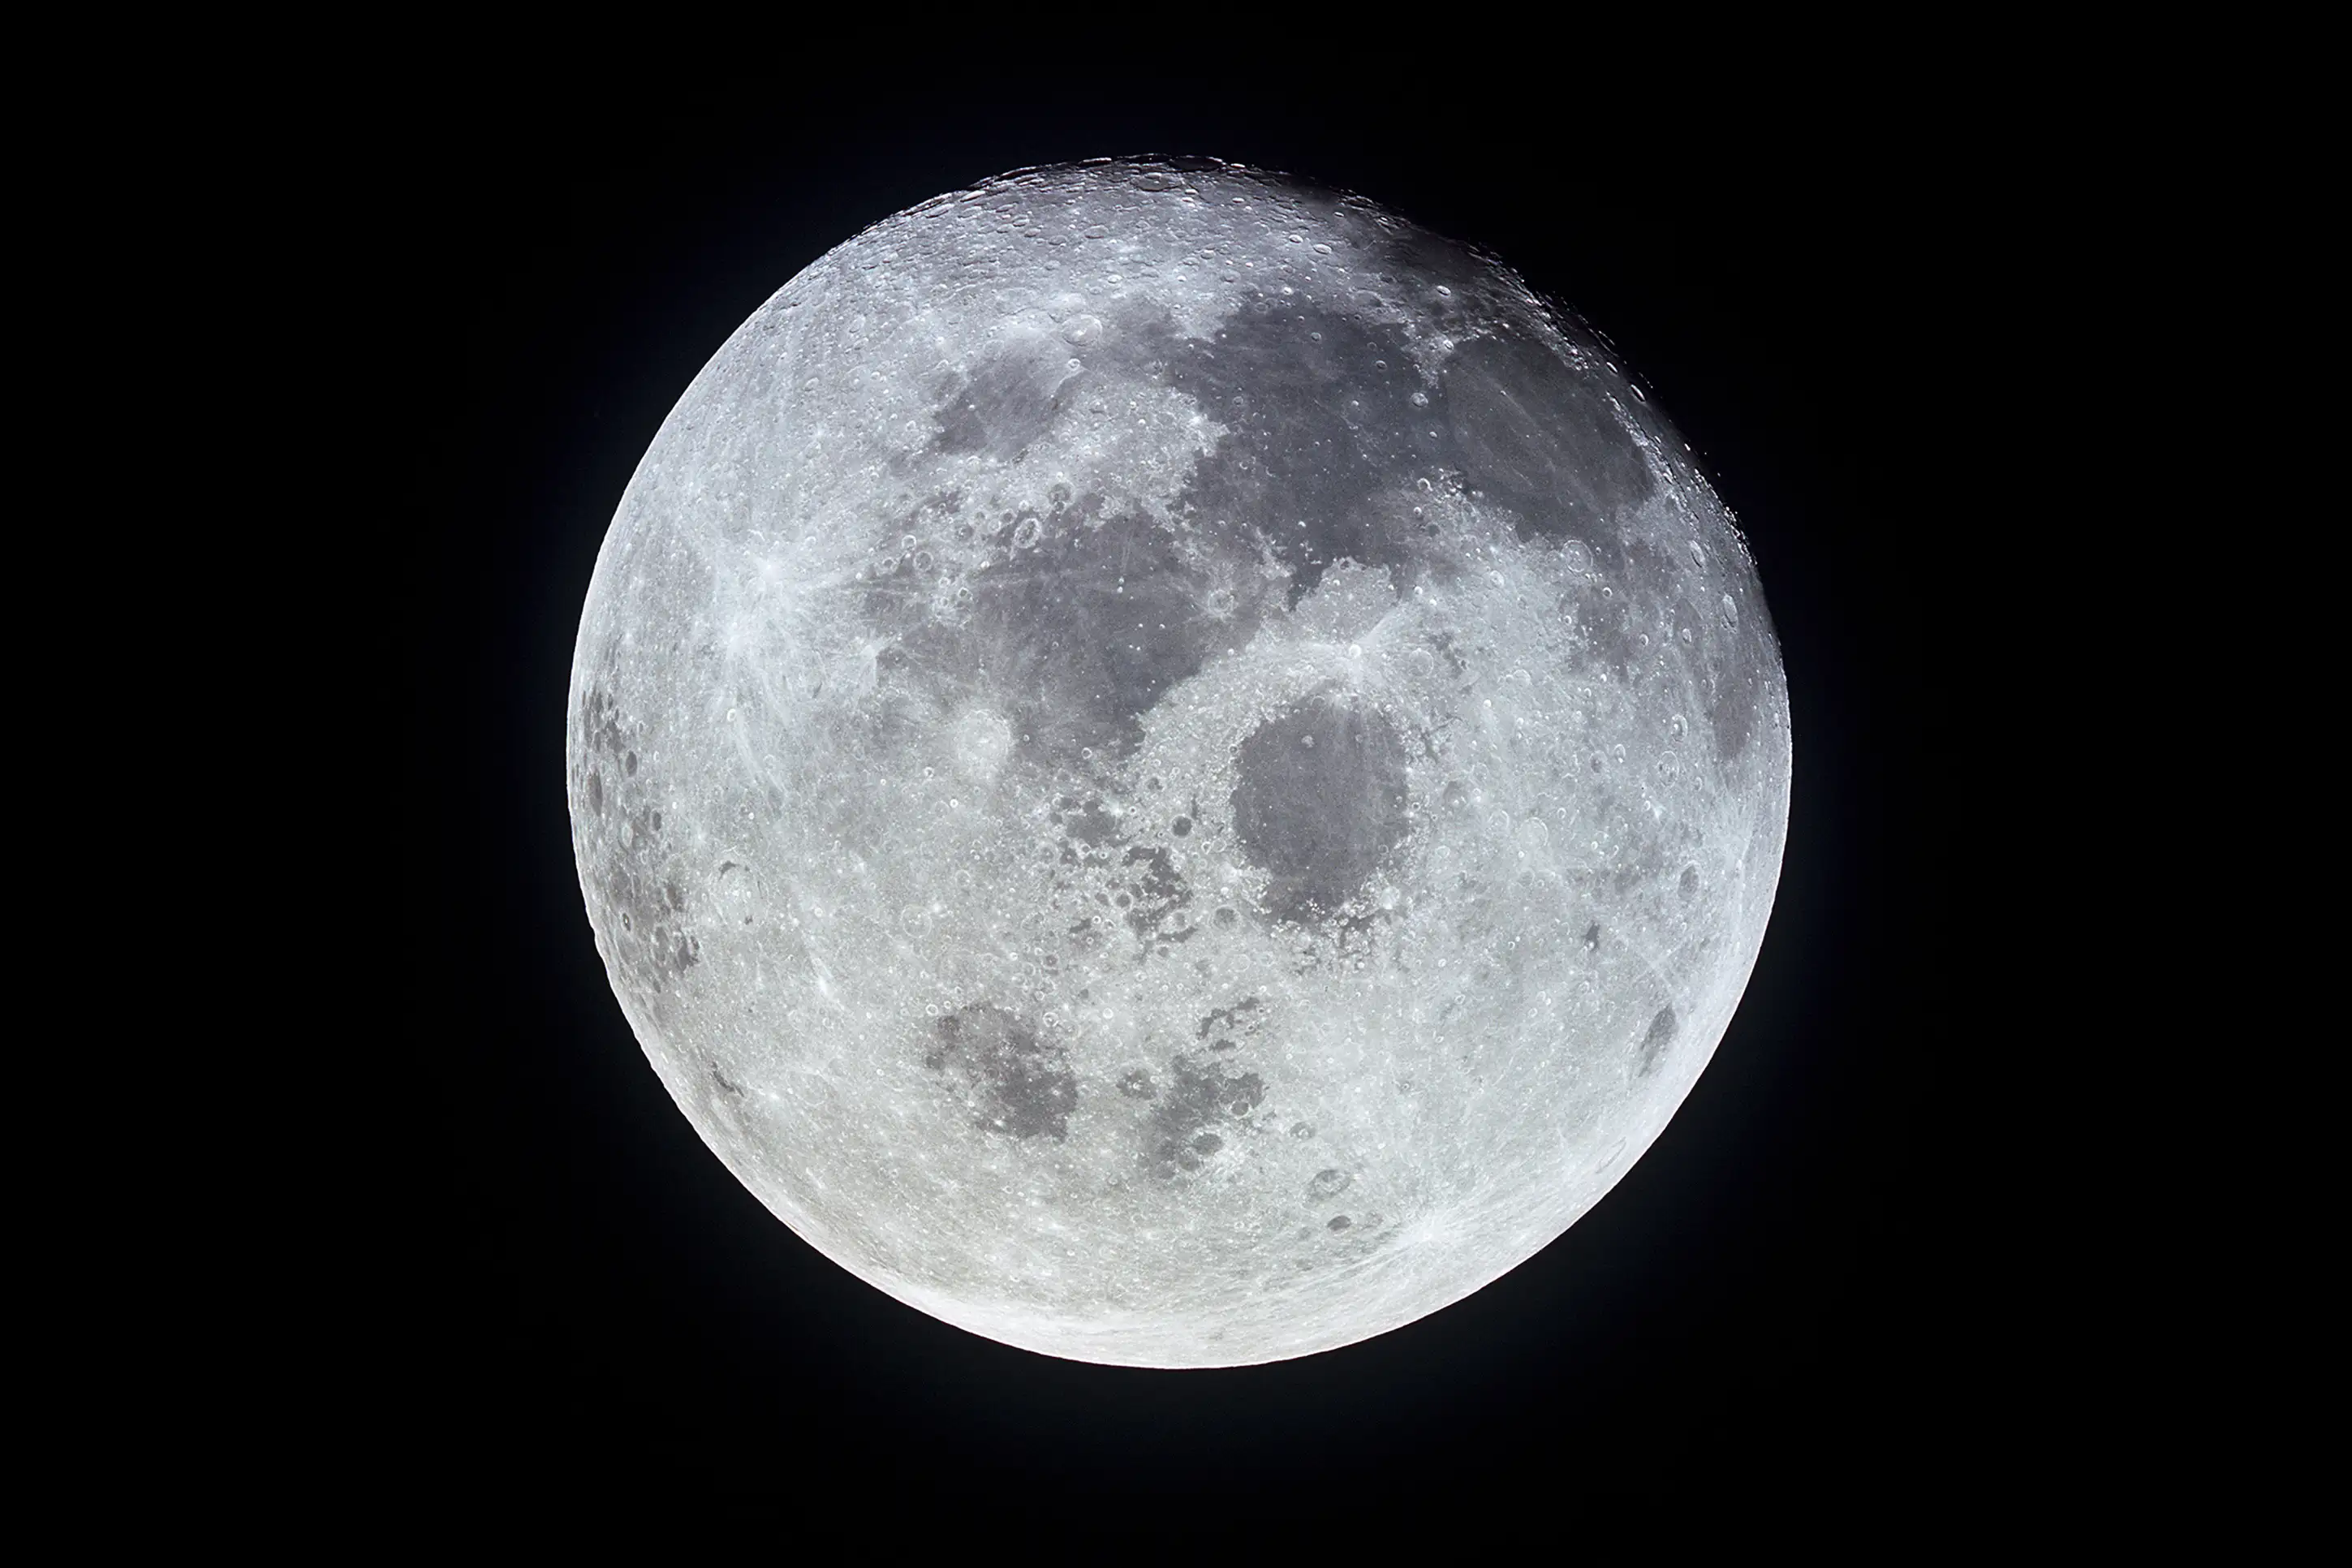 View of the full moon photographed from the Apollo 11 spacecraft during its trans-Earth journey homeward.